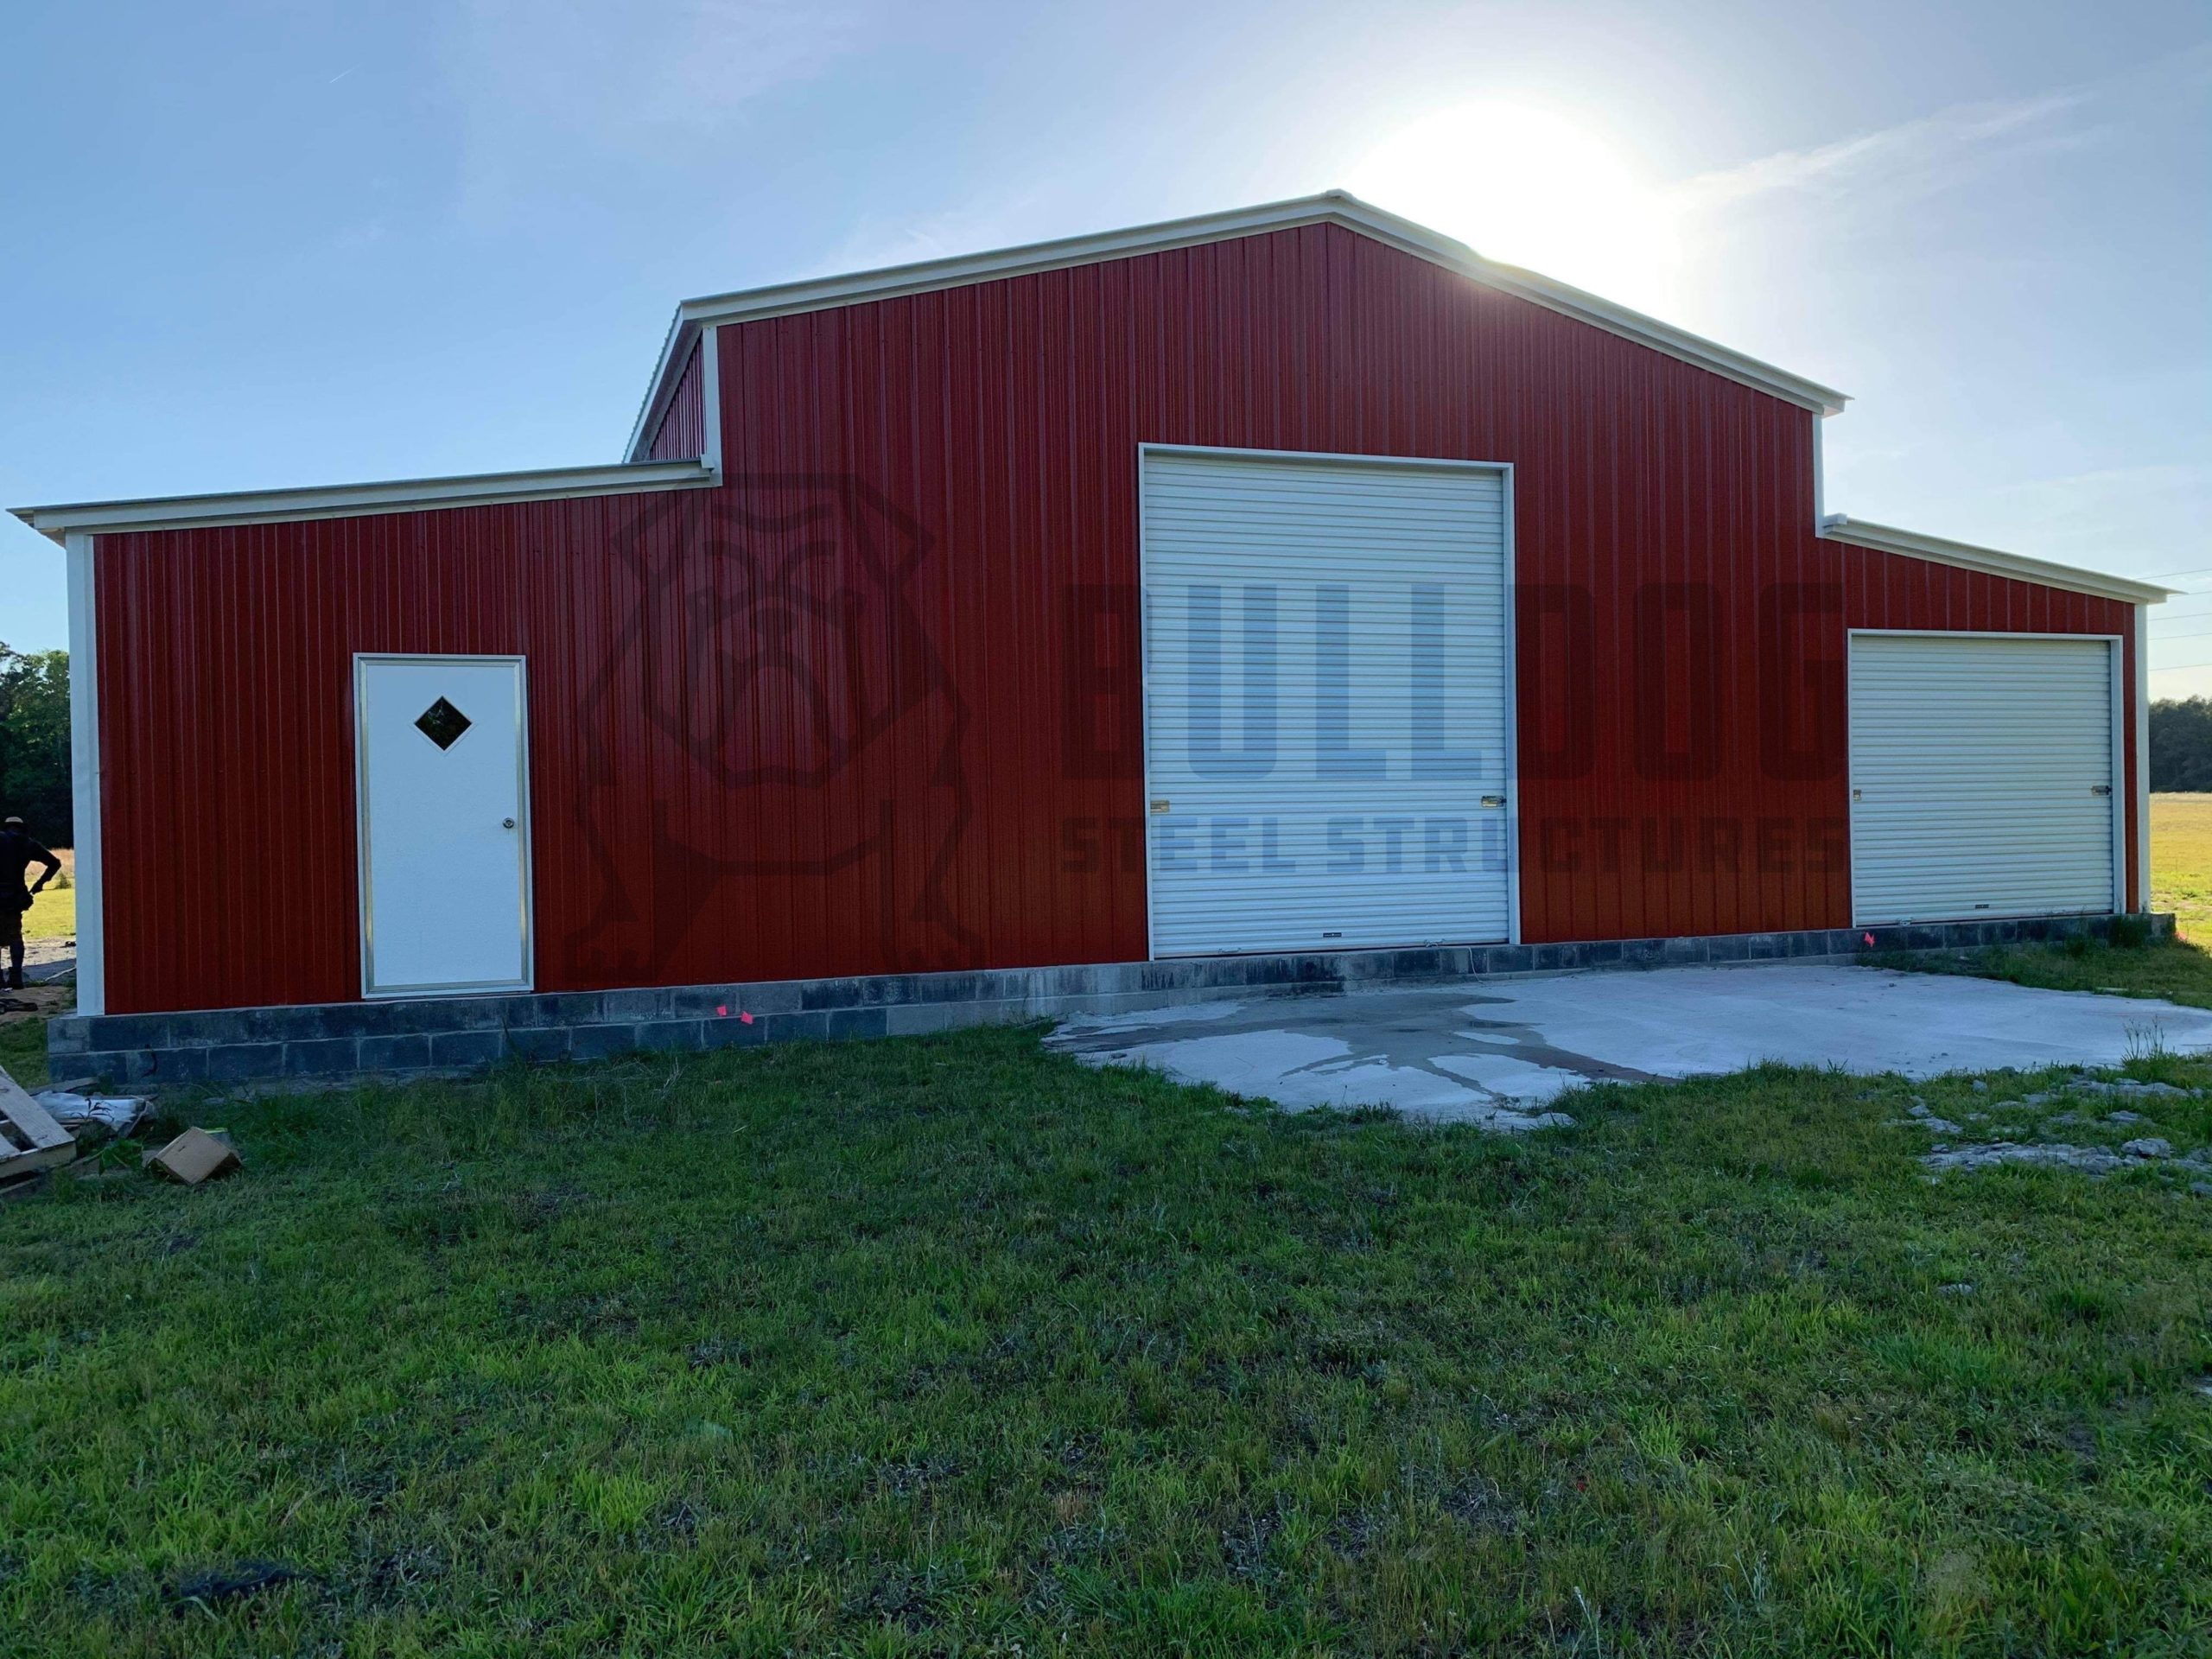 Exterior of barn with red walls